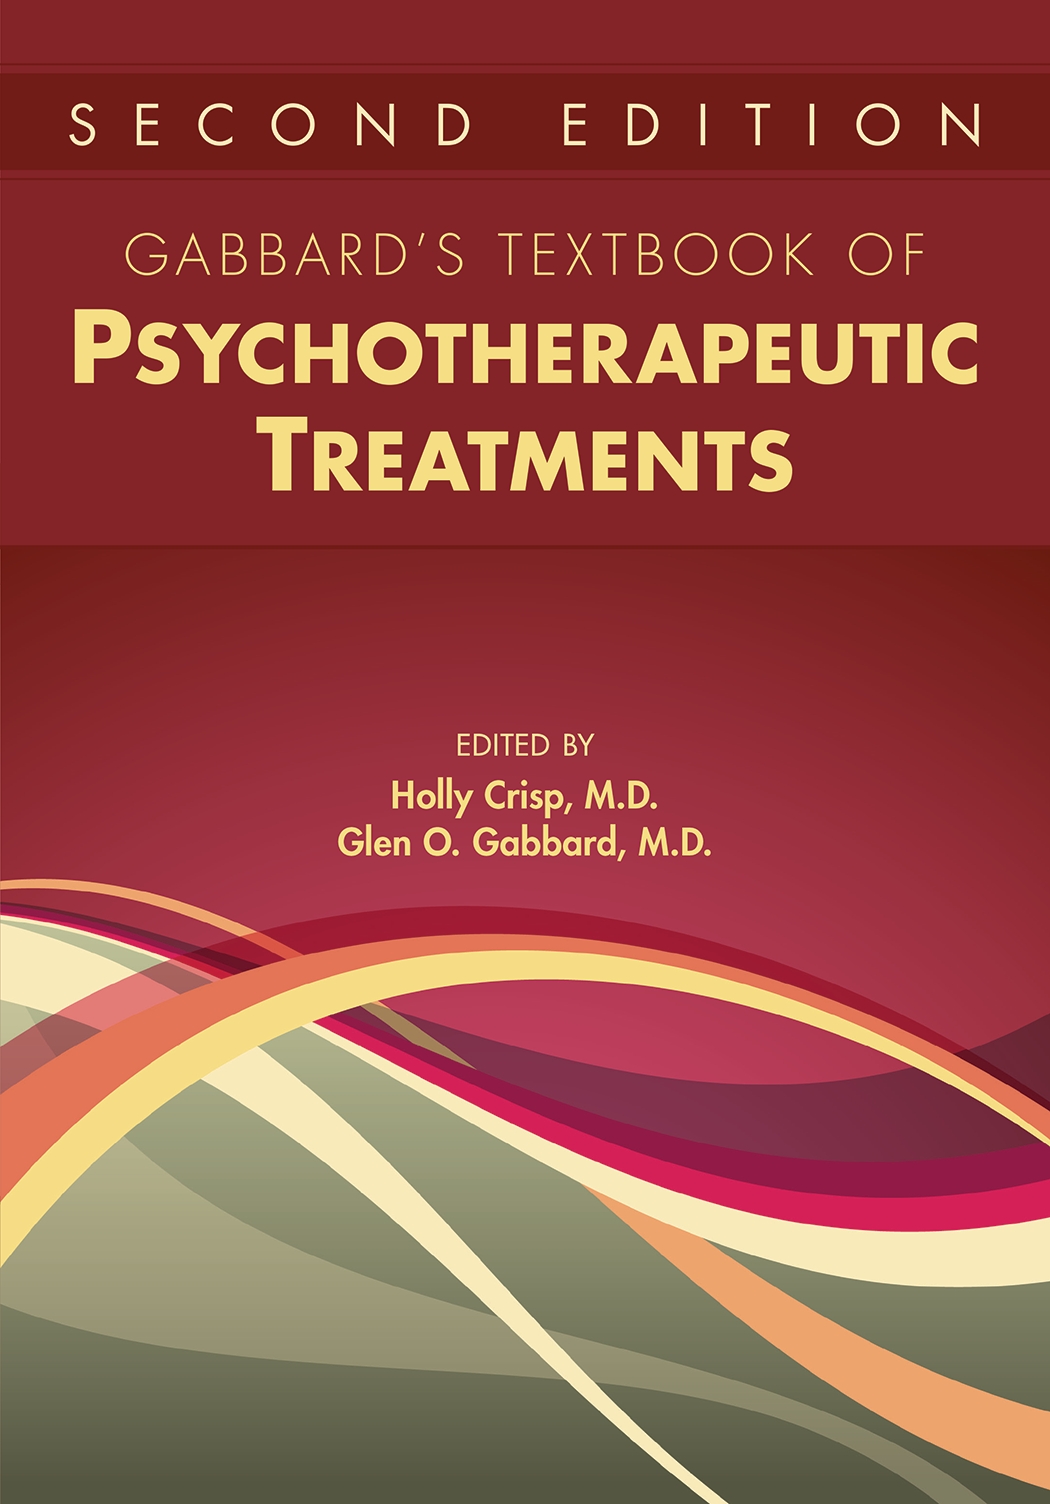 View Table of Contents for Gabbard’s Textbook of Psychotherapeutic Treatments